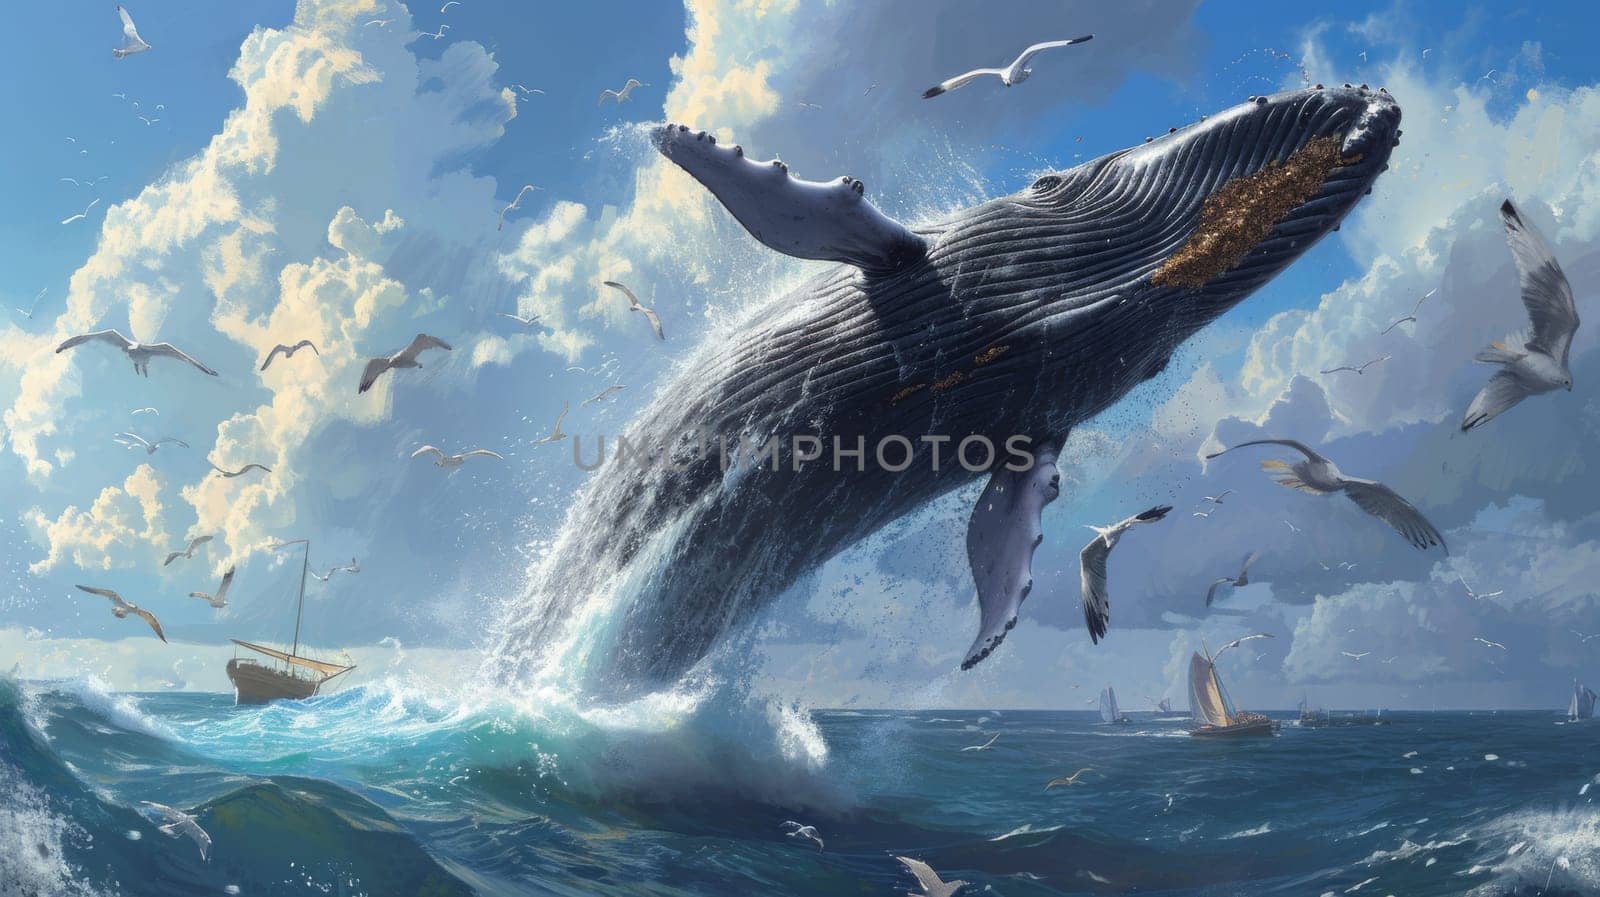 A large whale jumping out of the water with seagulls flying around it